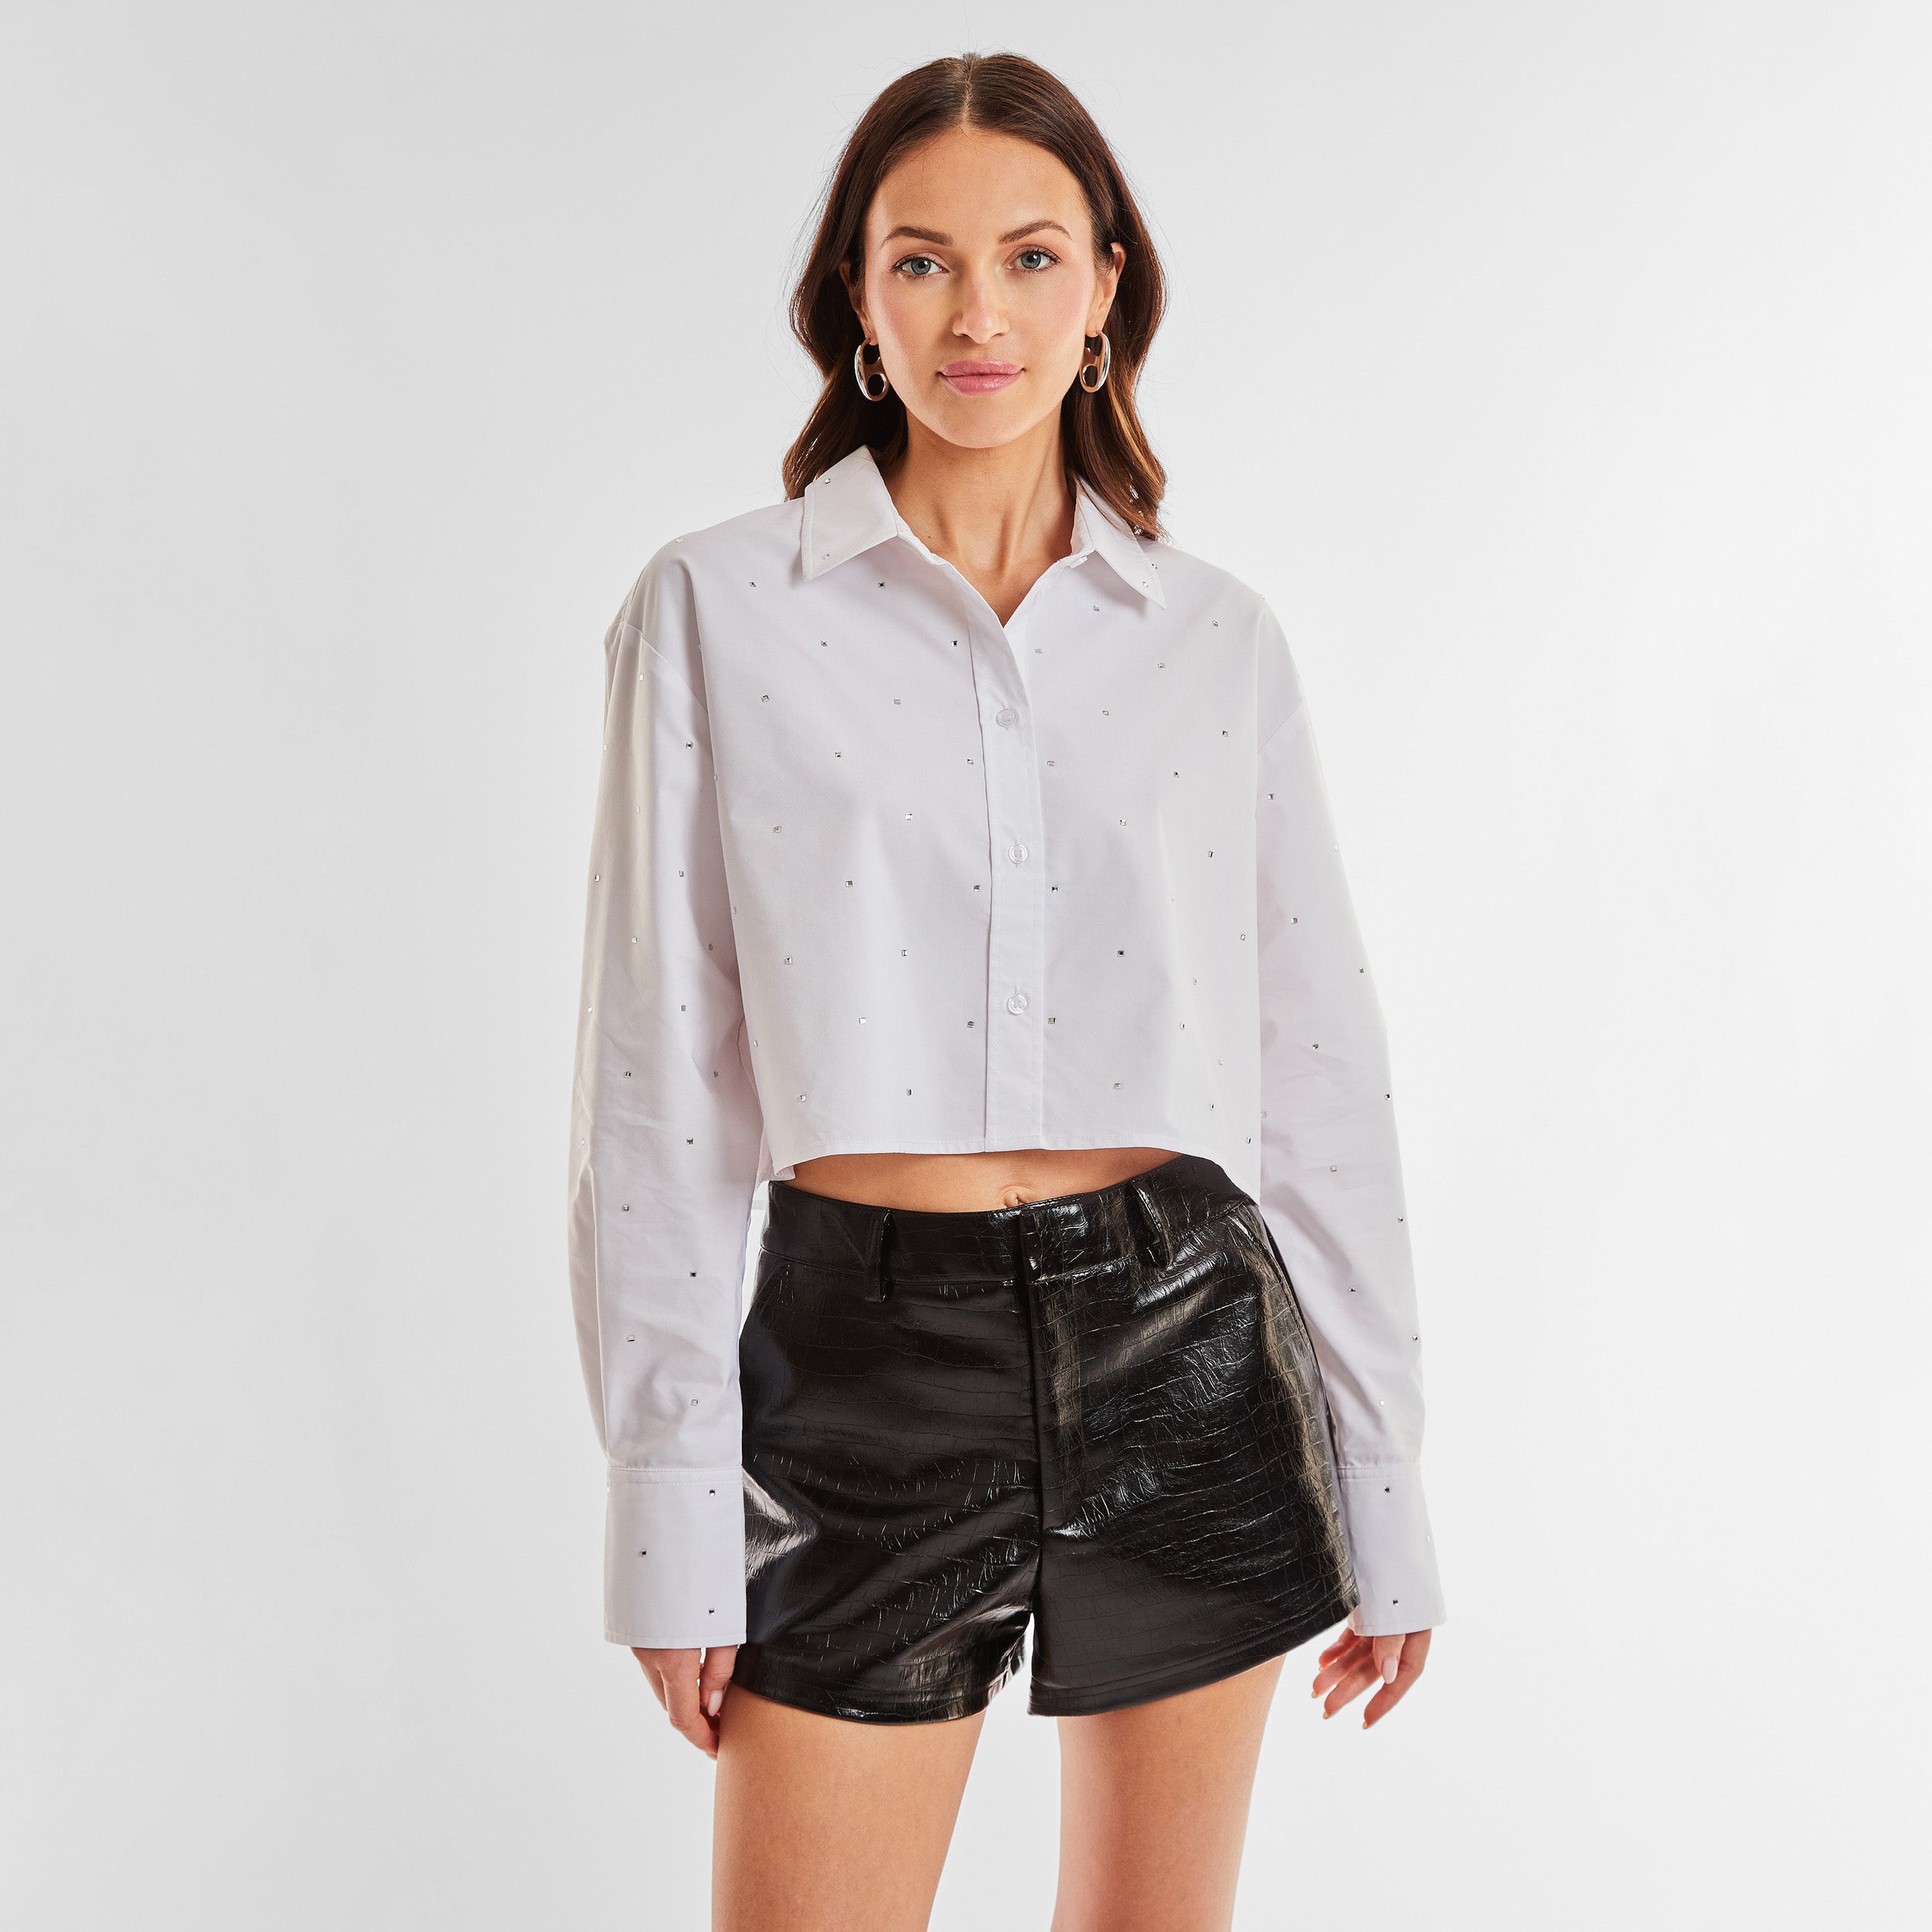 Front view of woman wearing a white cropped button down shirt with crystal embellishments and black croco pattern embossed faux leather short.